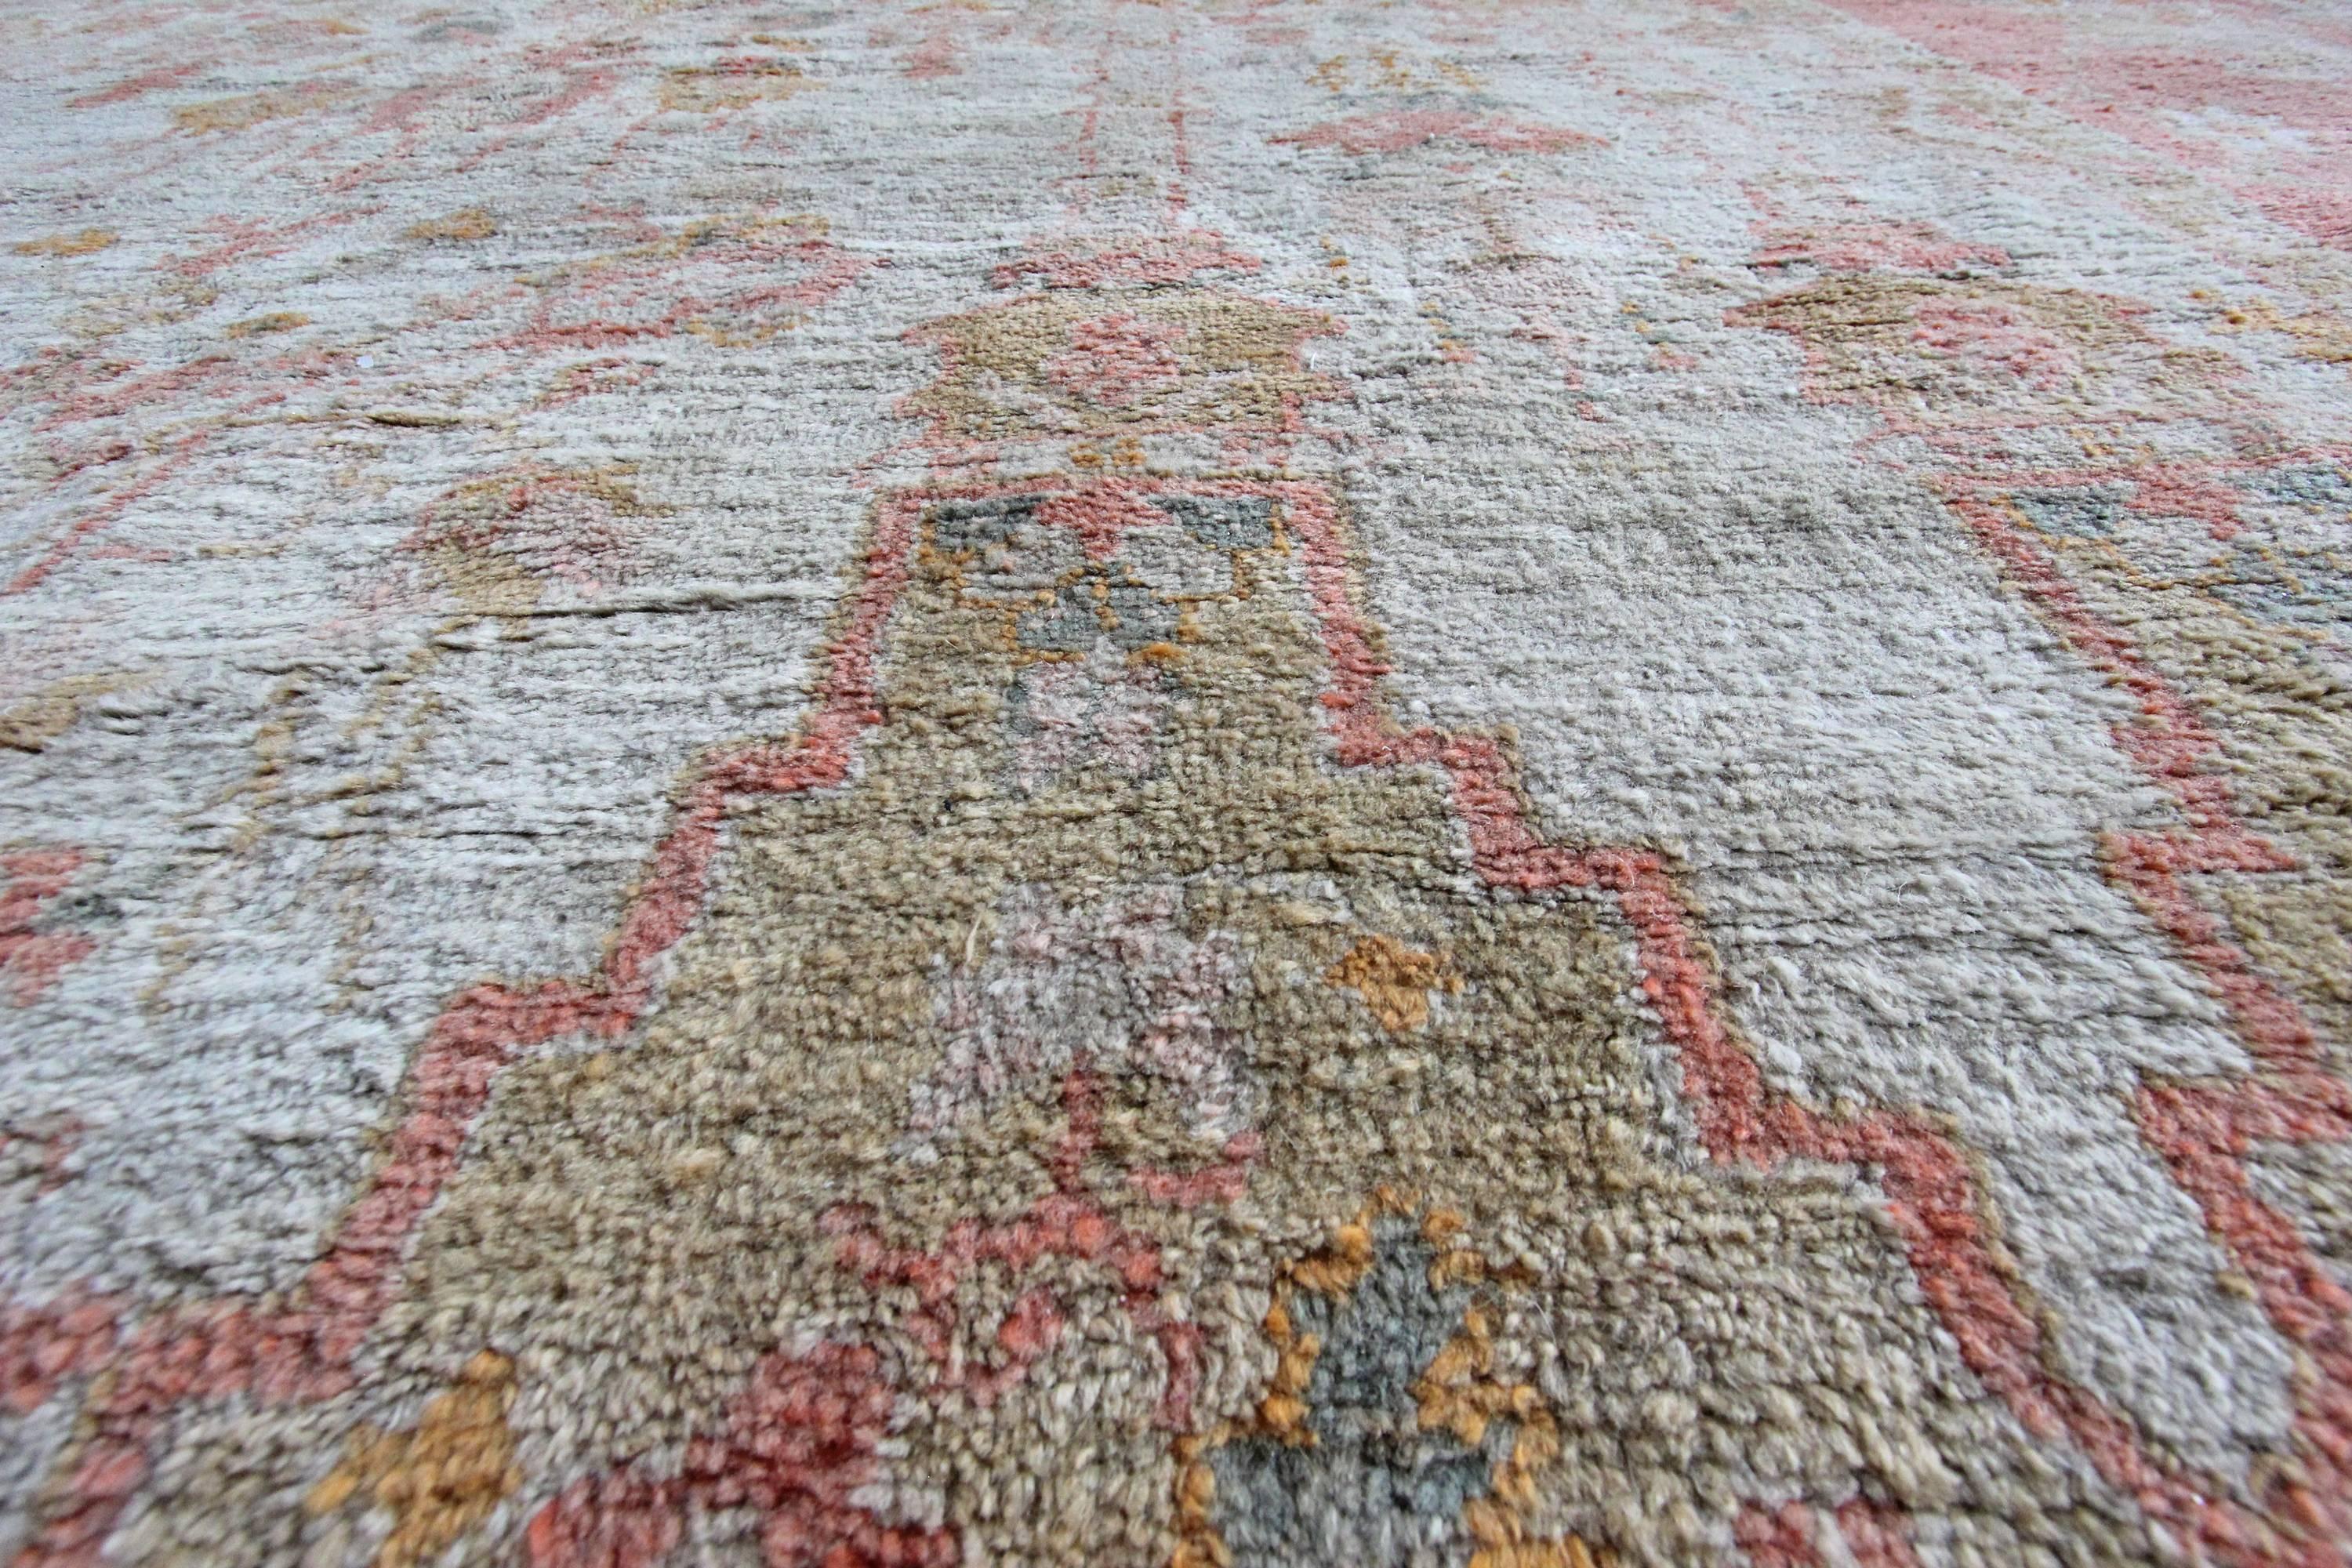 Antique Ushak Carpet, Western Anatolia In Excellent Condition For Sale In Crondall, Surrey